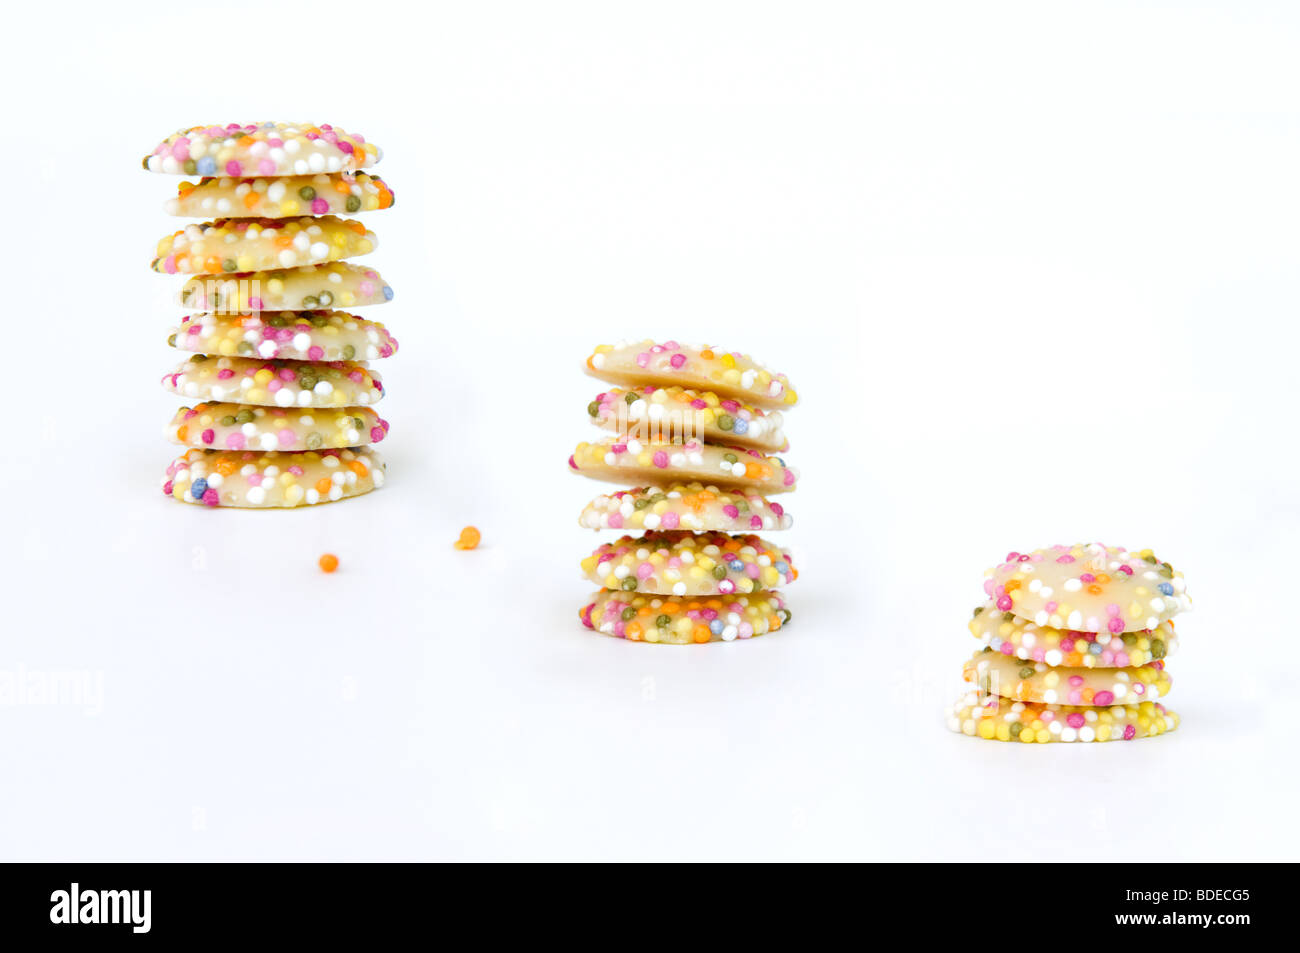 Still life artistic shot of white chocolate button sweets covered in sprinkles taken against a white background Stock Photo